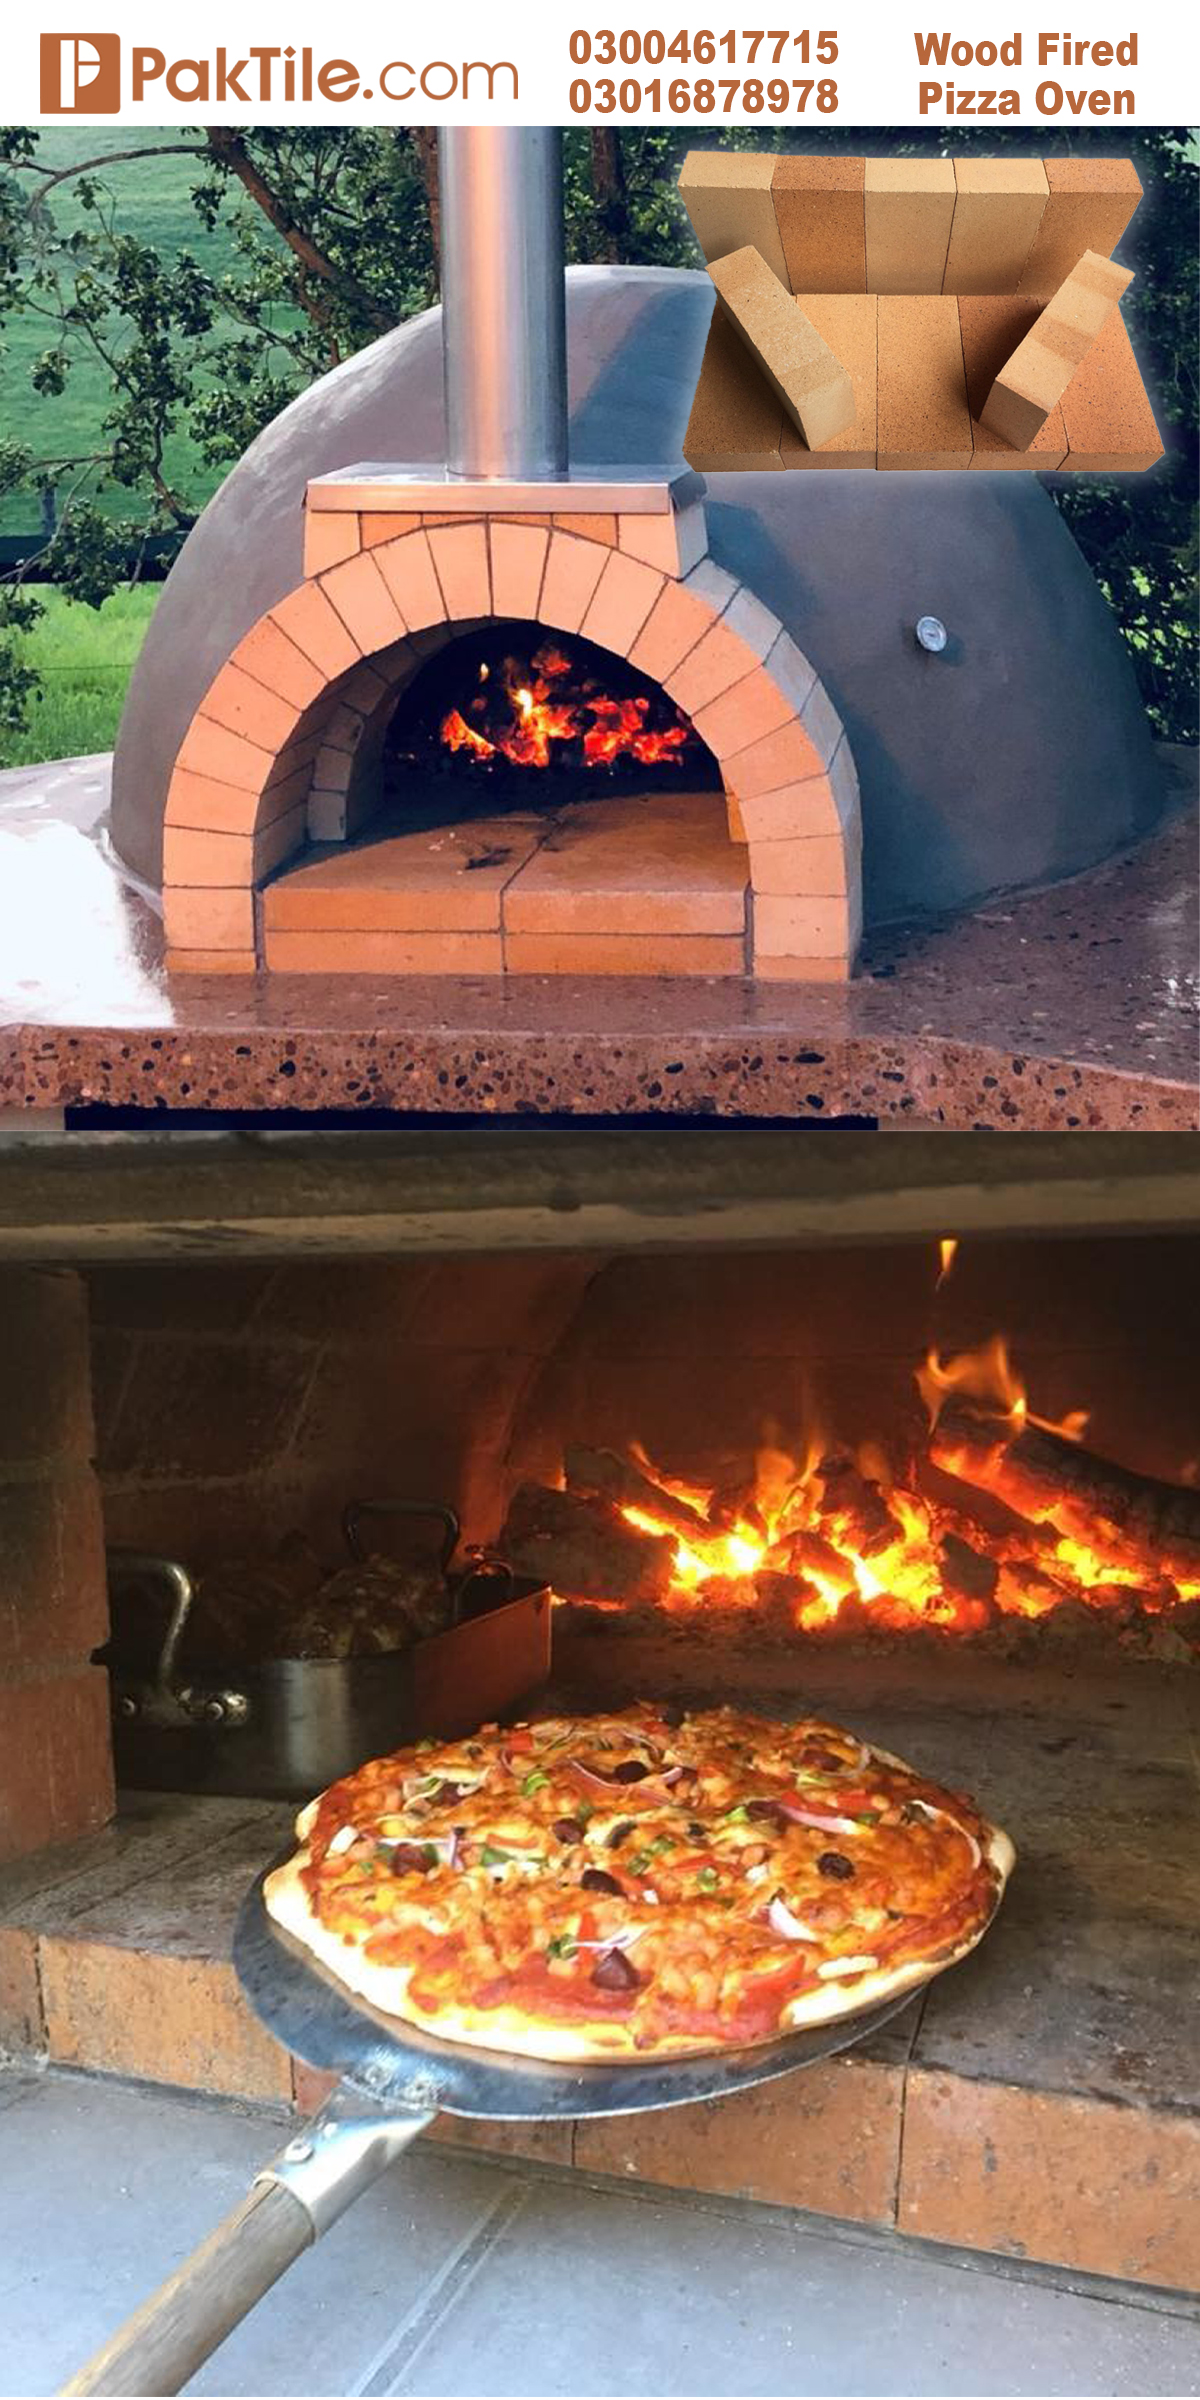 Pak clay tiles wood fired pizza oven bricks